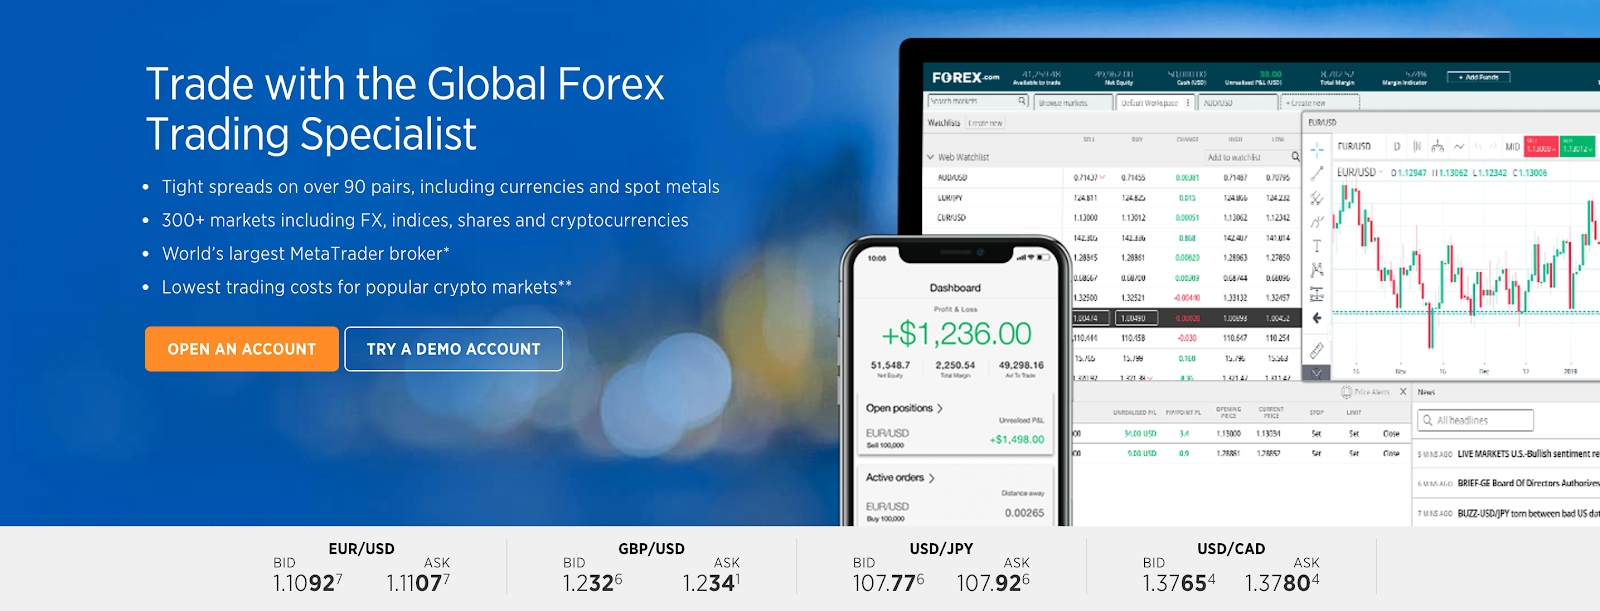 Can you get rich by trading forex: Forex.com broker homepage screenshot.